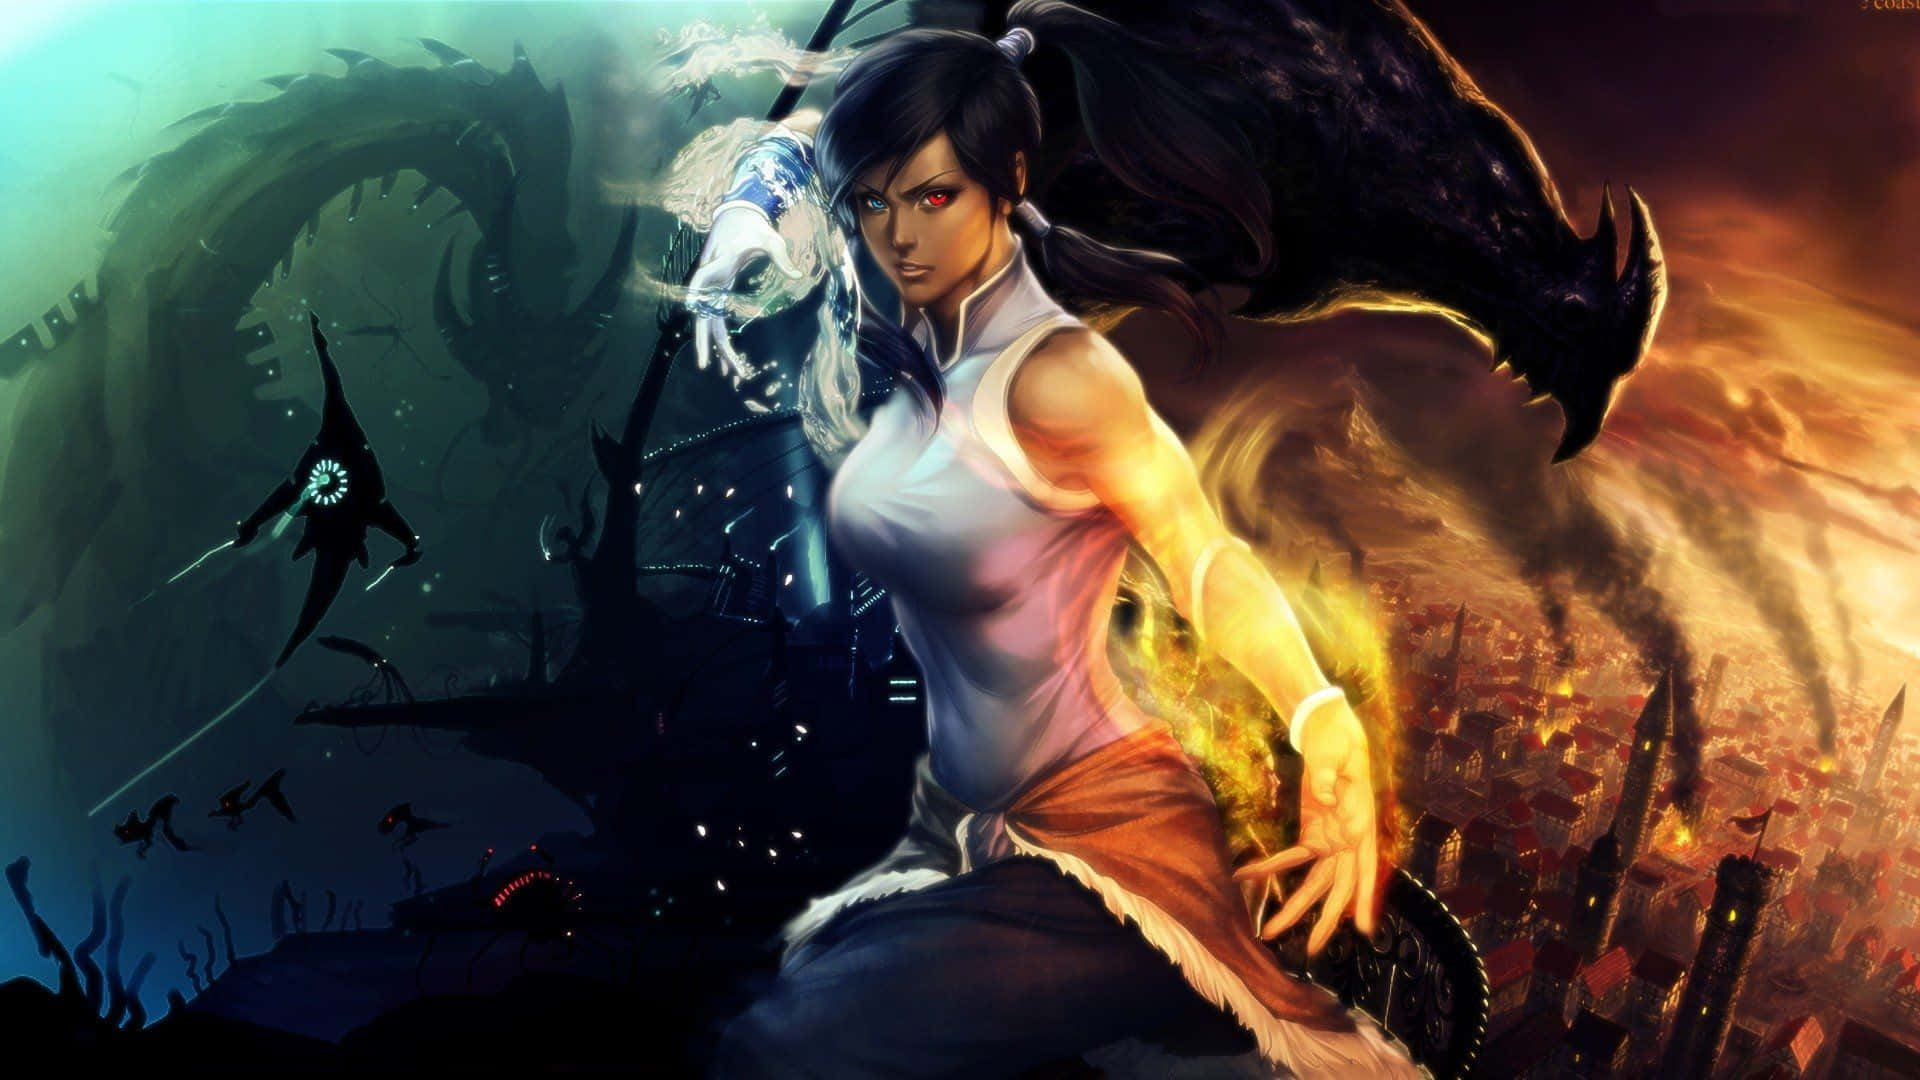 Korra And Her Airbending Team Take On An Epic Battle. Background